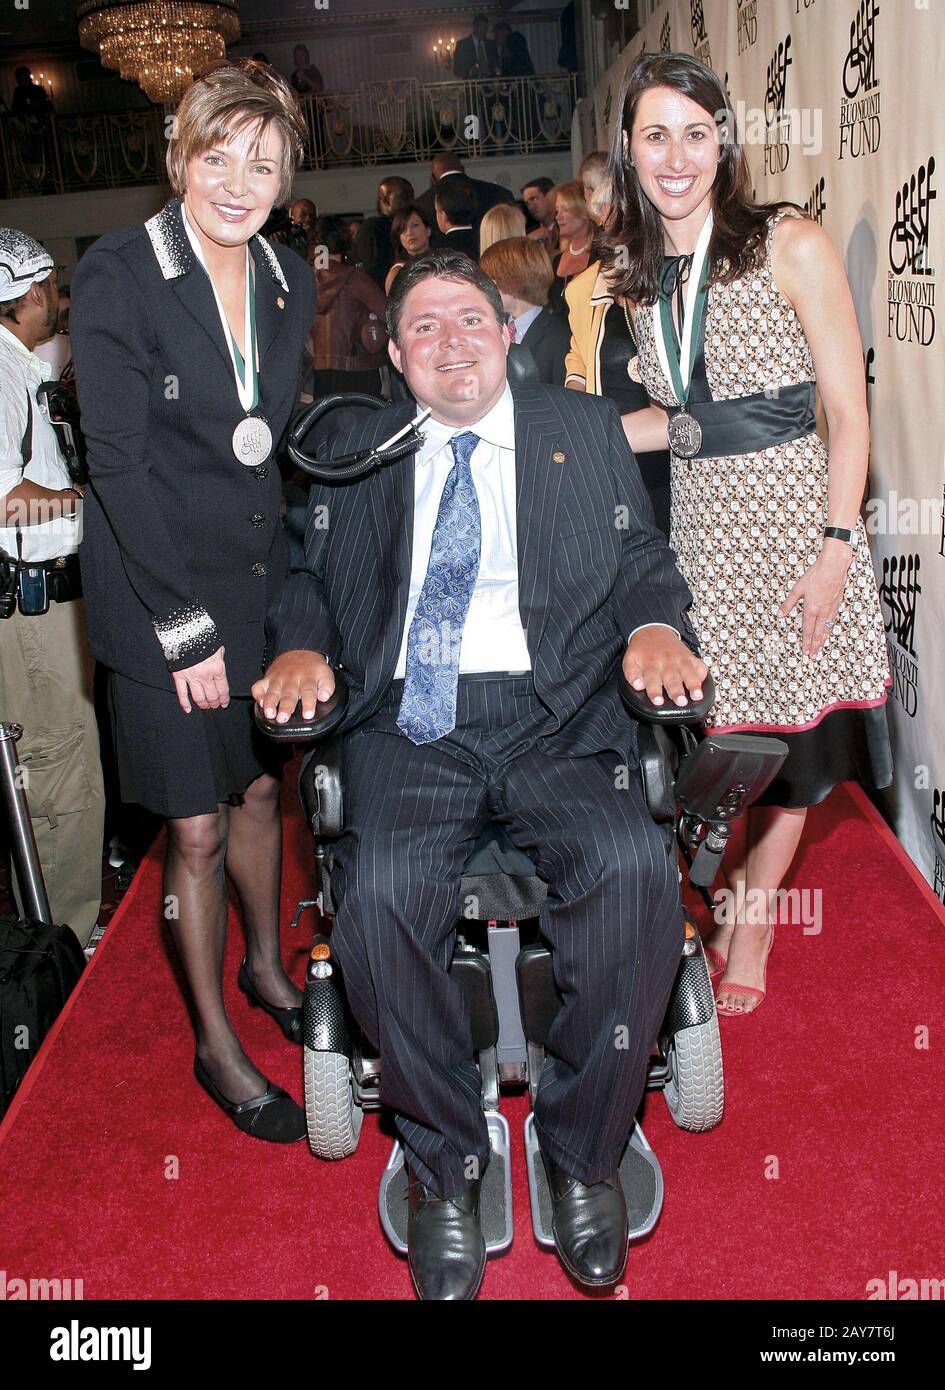 New York, NY, USA. 17 September, 2007. Lesley Visser, Marc Buoniconti, Janet Evans at the 22nd Annual Sports Legends Dinner to benefit The Buoniconti Fund to Cure Paralysis at Waldorf=Astoria. Credit: Steve Mack/Alamy Stock Photo